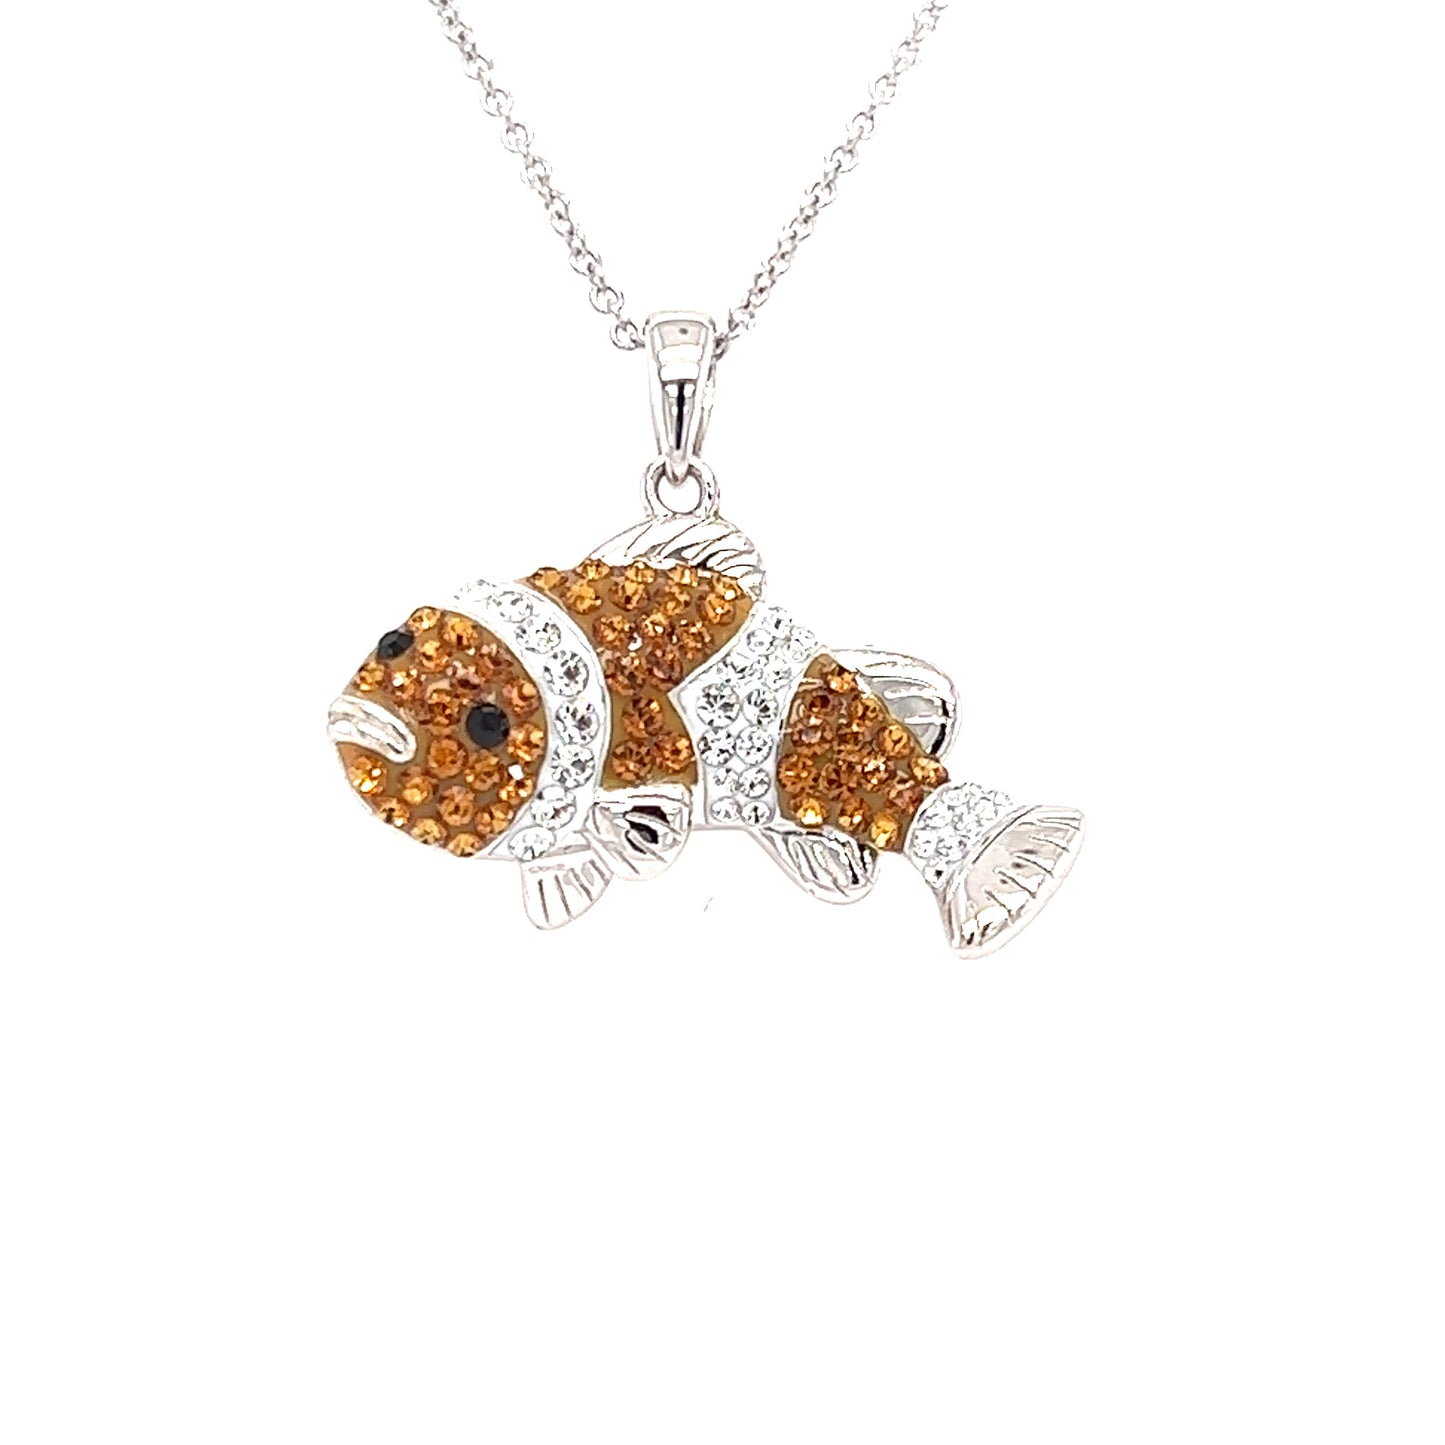 Clownfish Necklace with Orange and White Crystals in Sterling Silver Pendant View